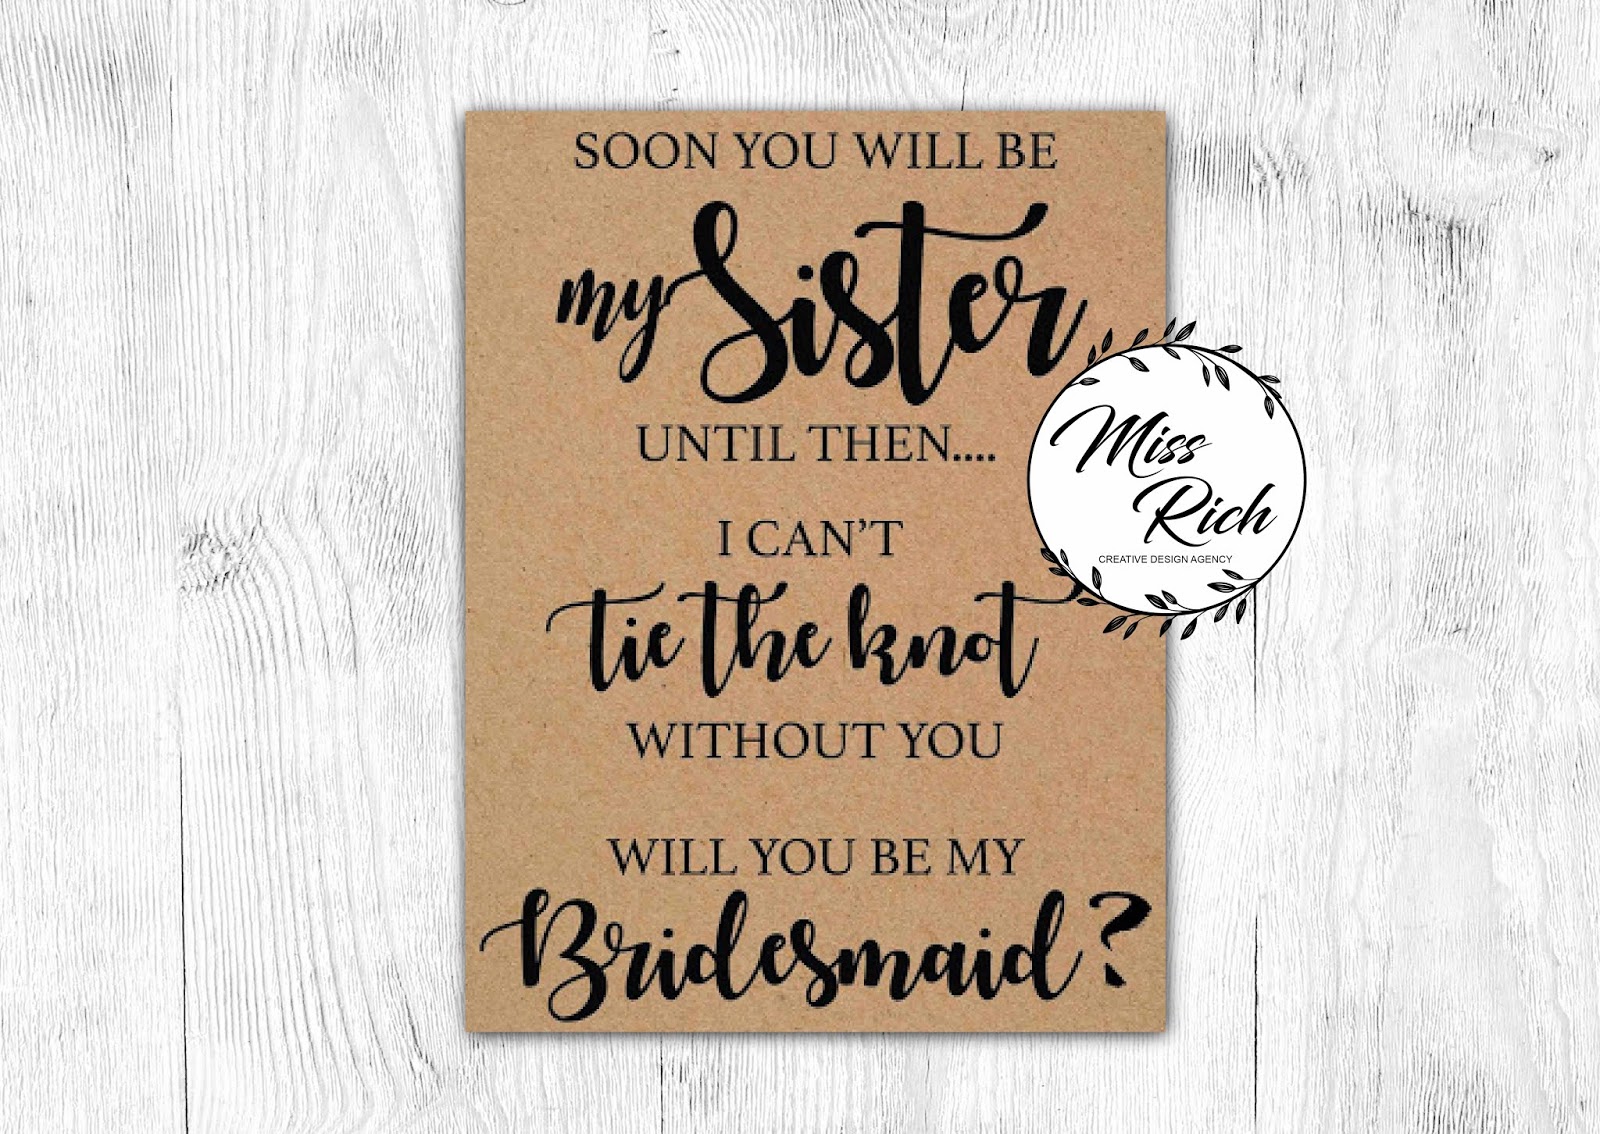 will-you-be-my-bridesmaid-printables-miss-rich